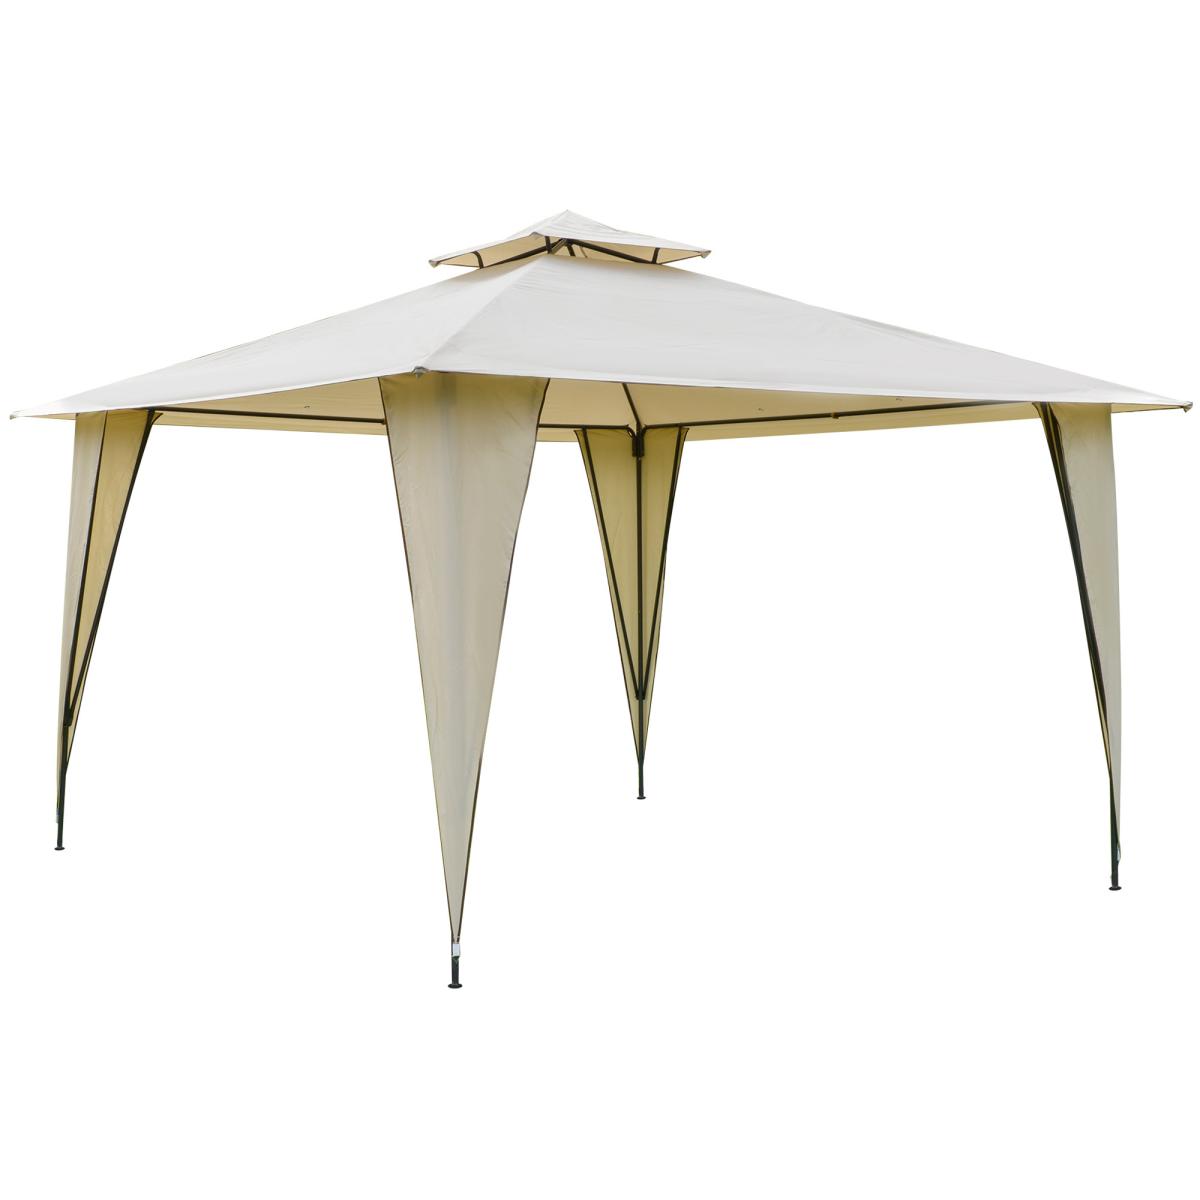 11' x 11' Outdoor Canopy Tent Party Gazebo with Double-Tier Roof, Steel Frame, Included Ground Stakes, Beige